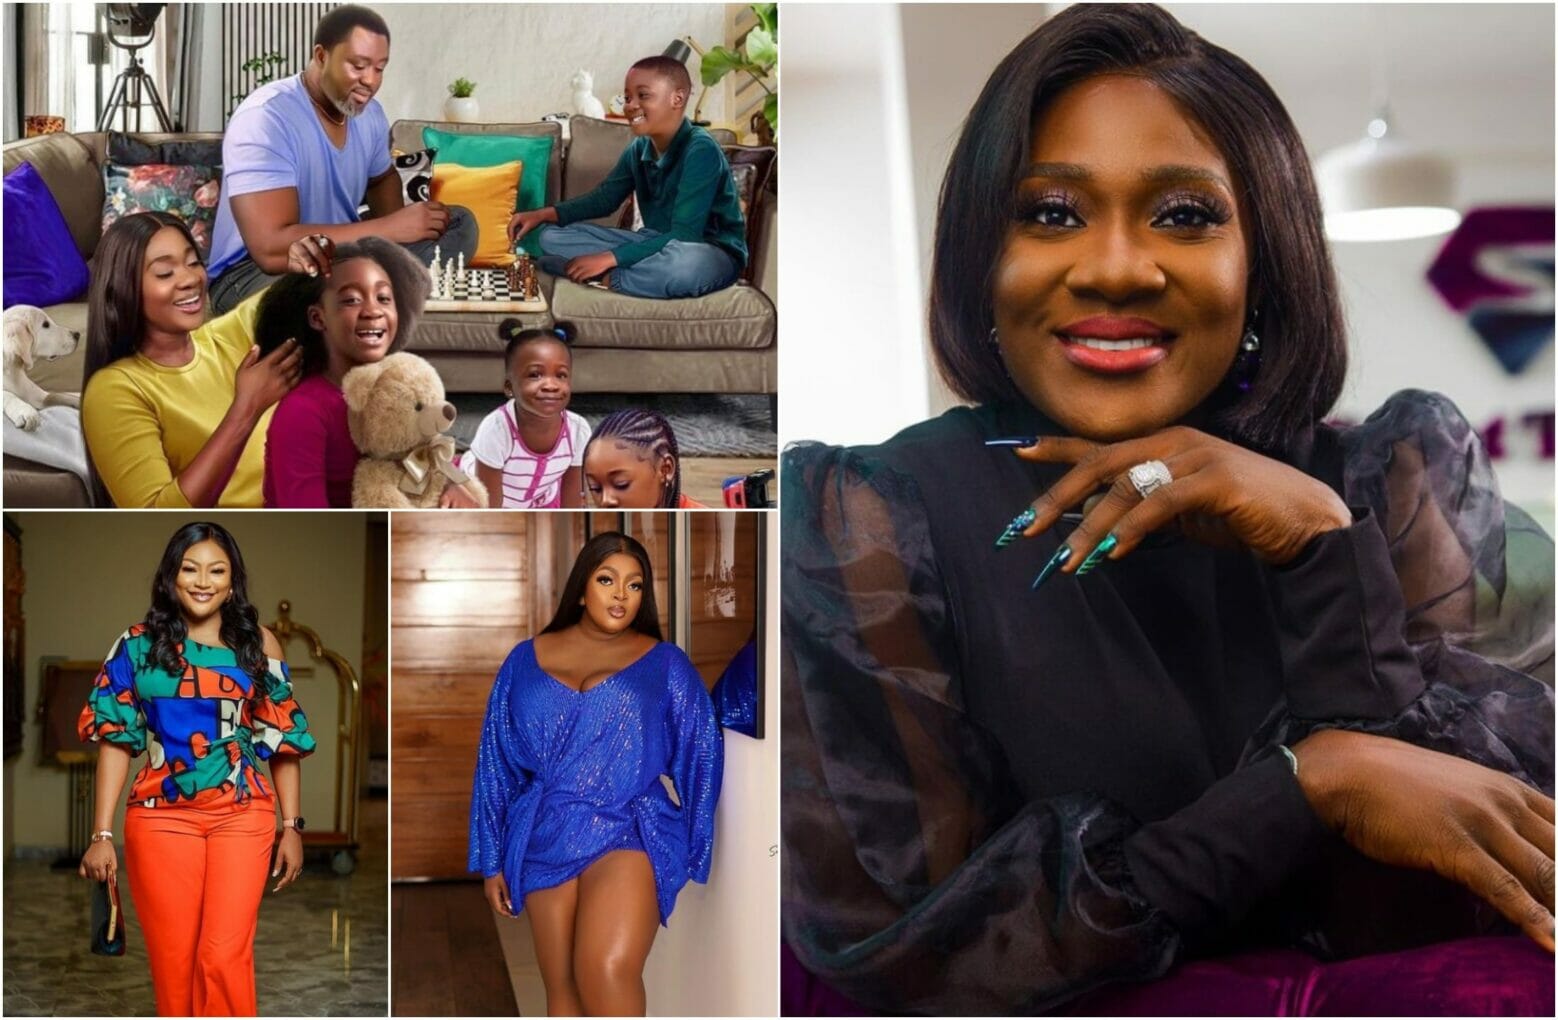 Fan wows Mercy Johnson with beautiful family artwork